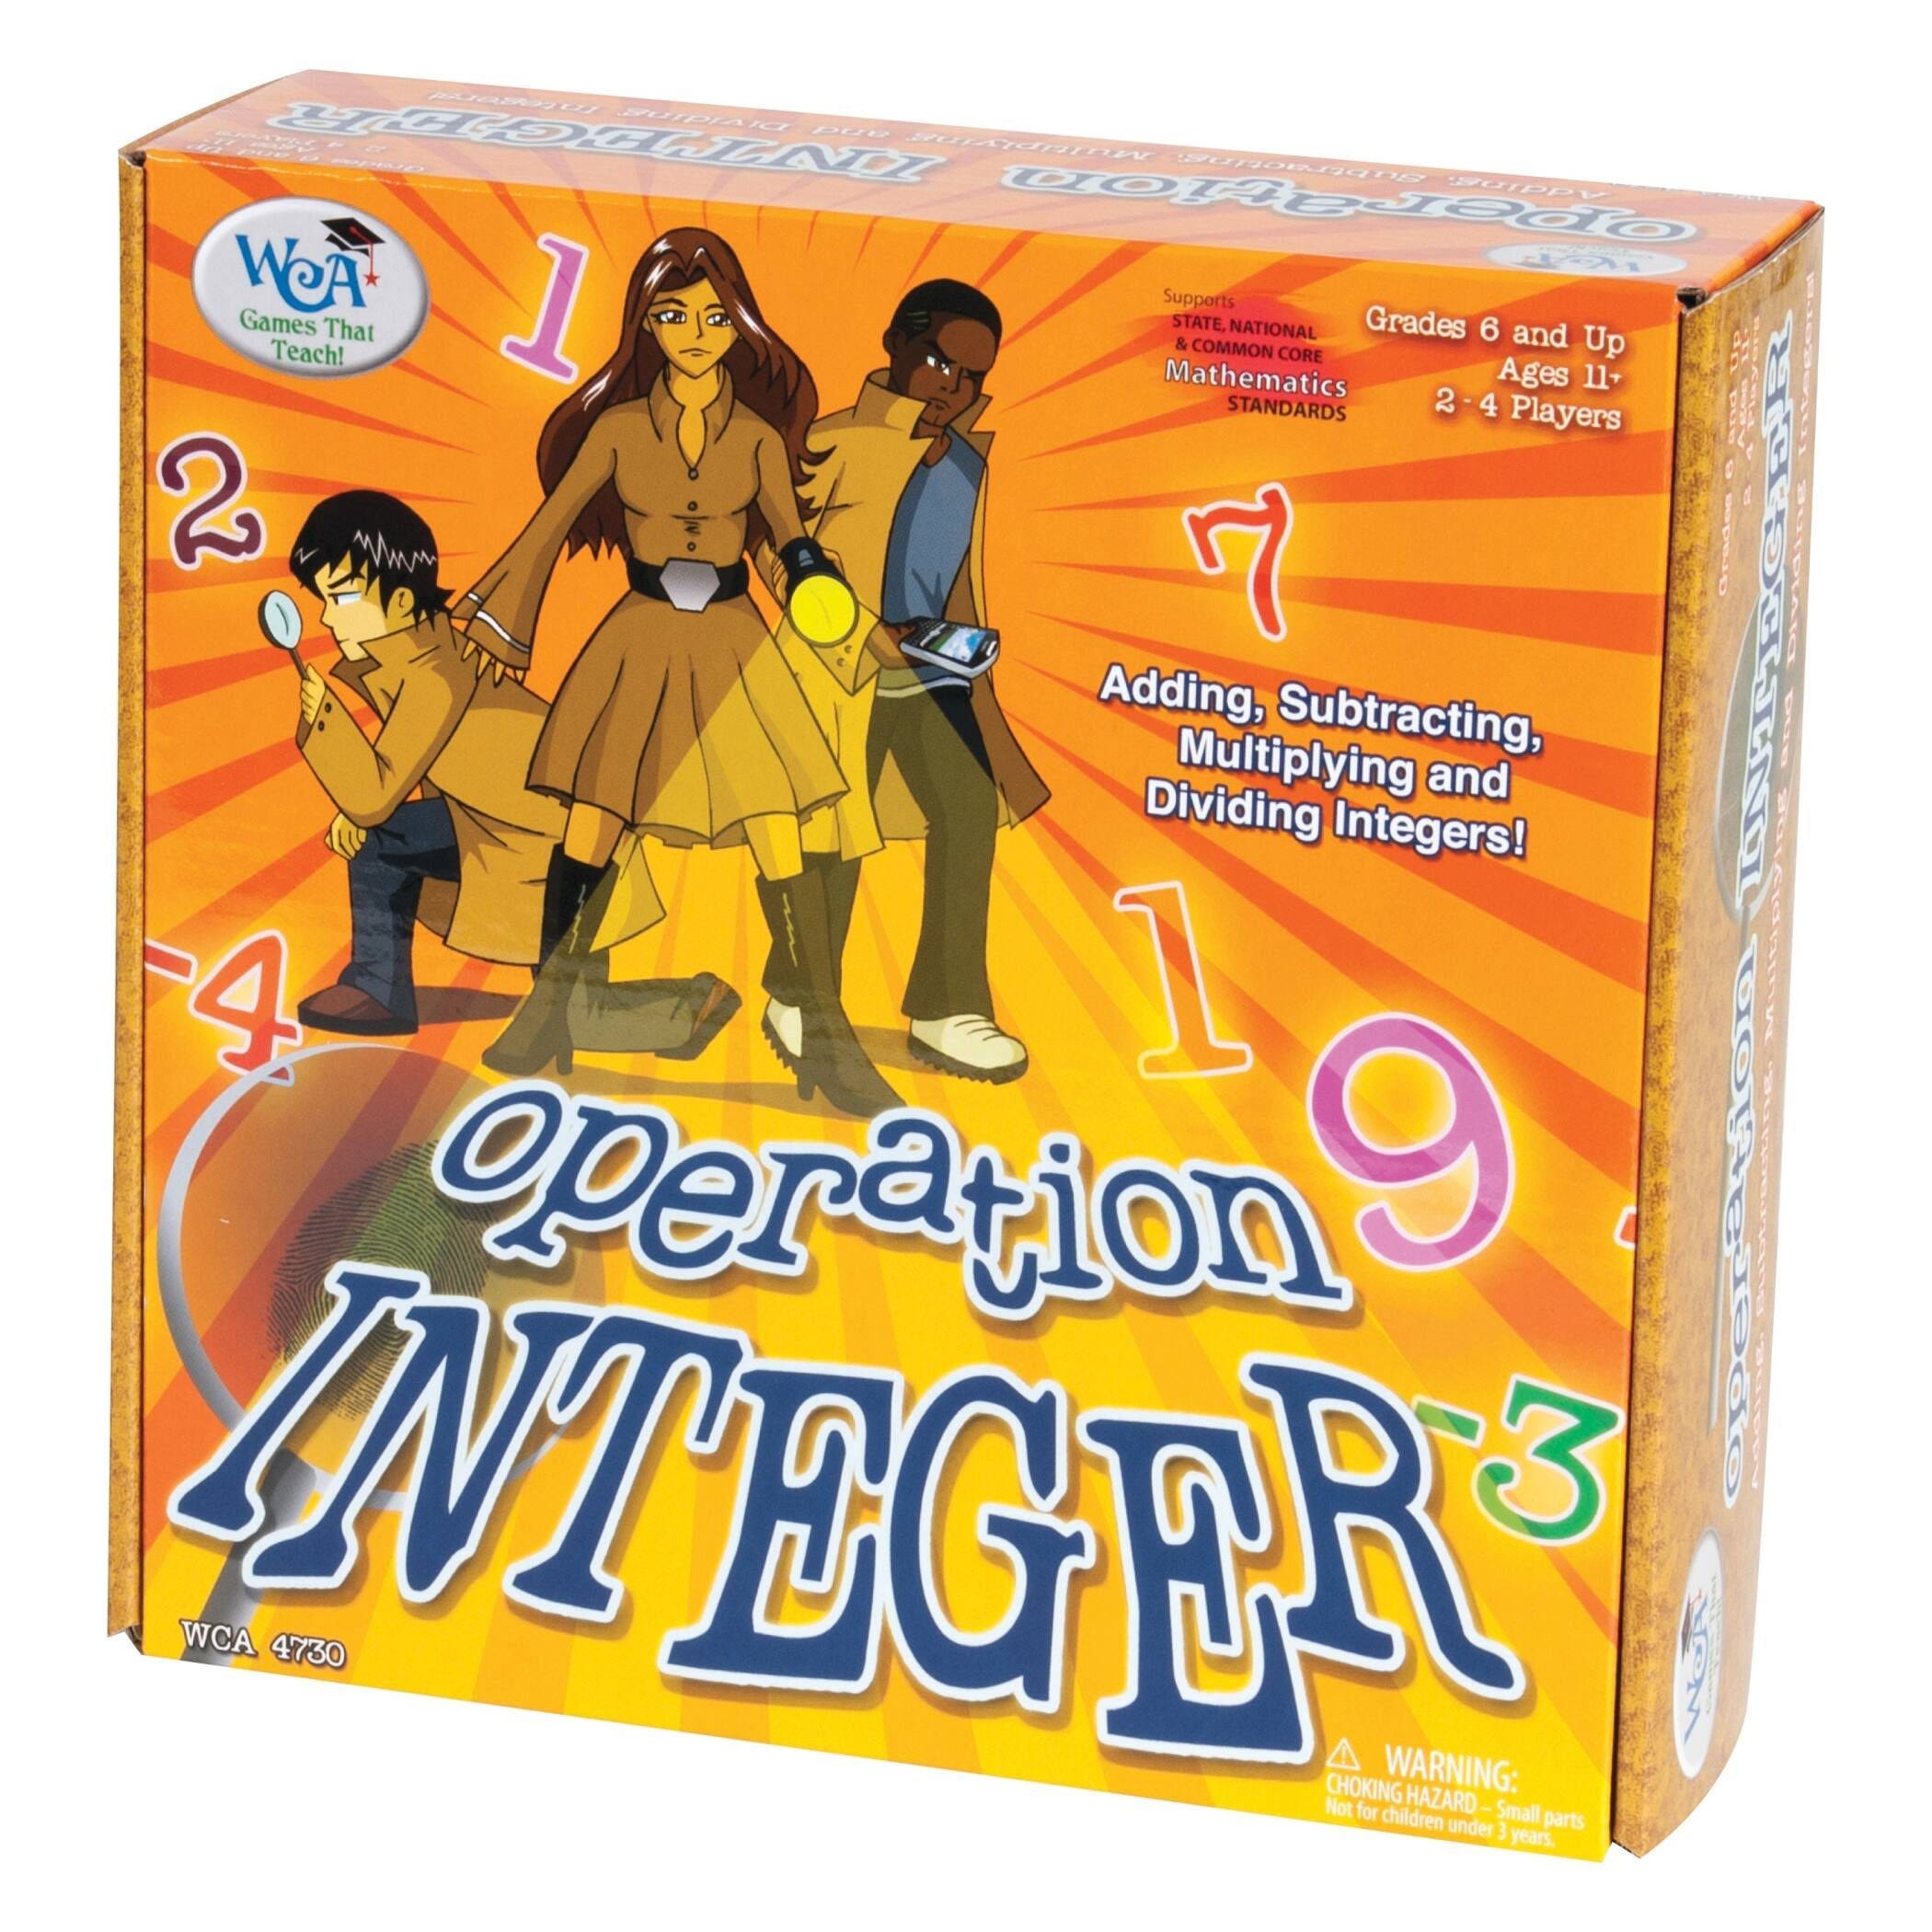 Operation Integer: Introducing Integers Board Game for Grades 6 and Up | Image